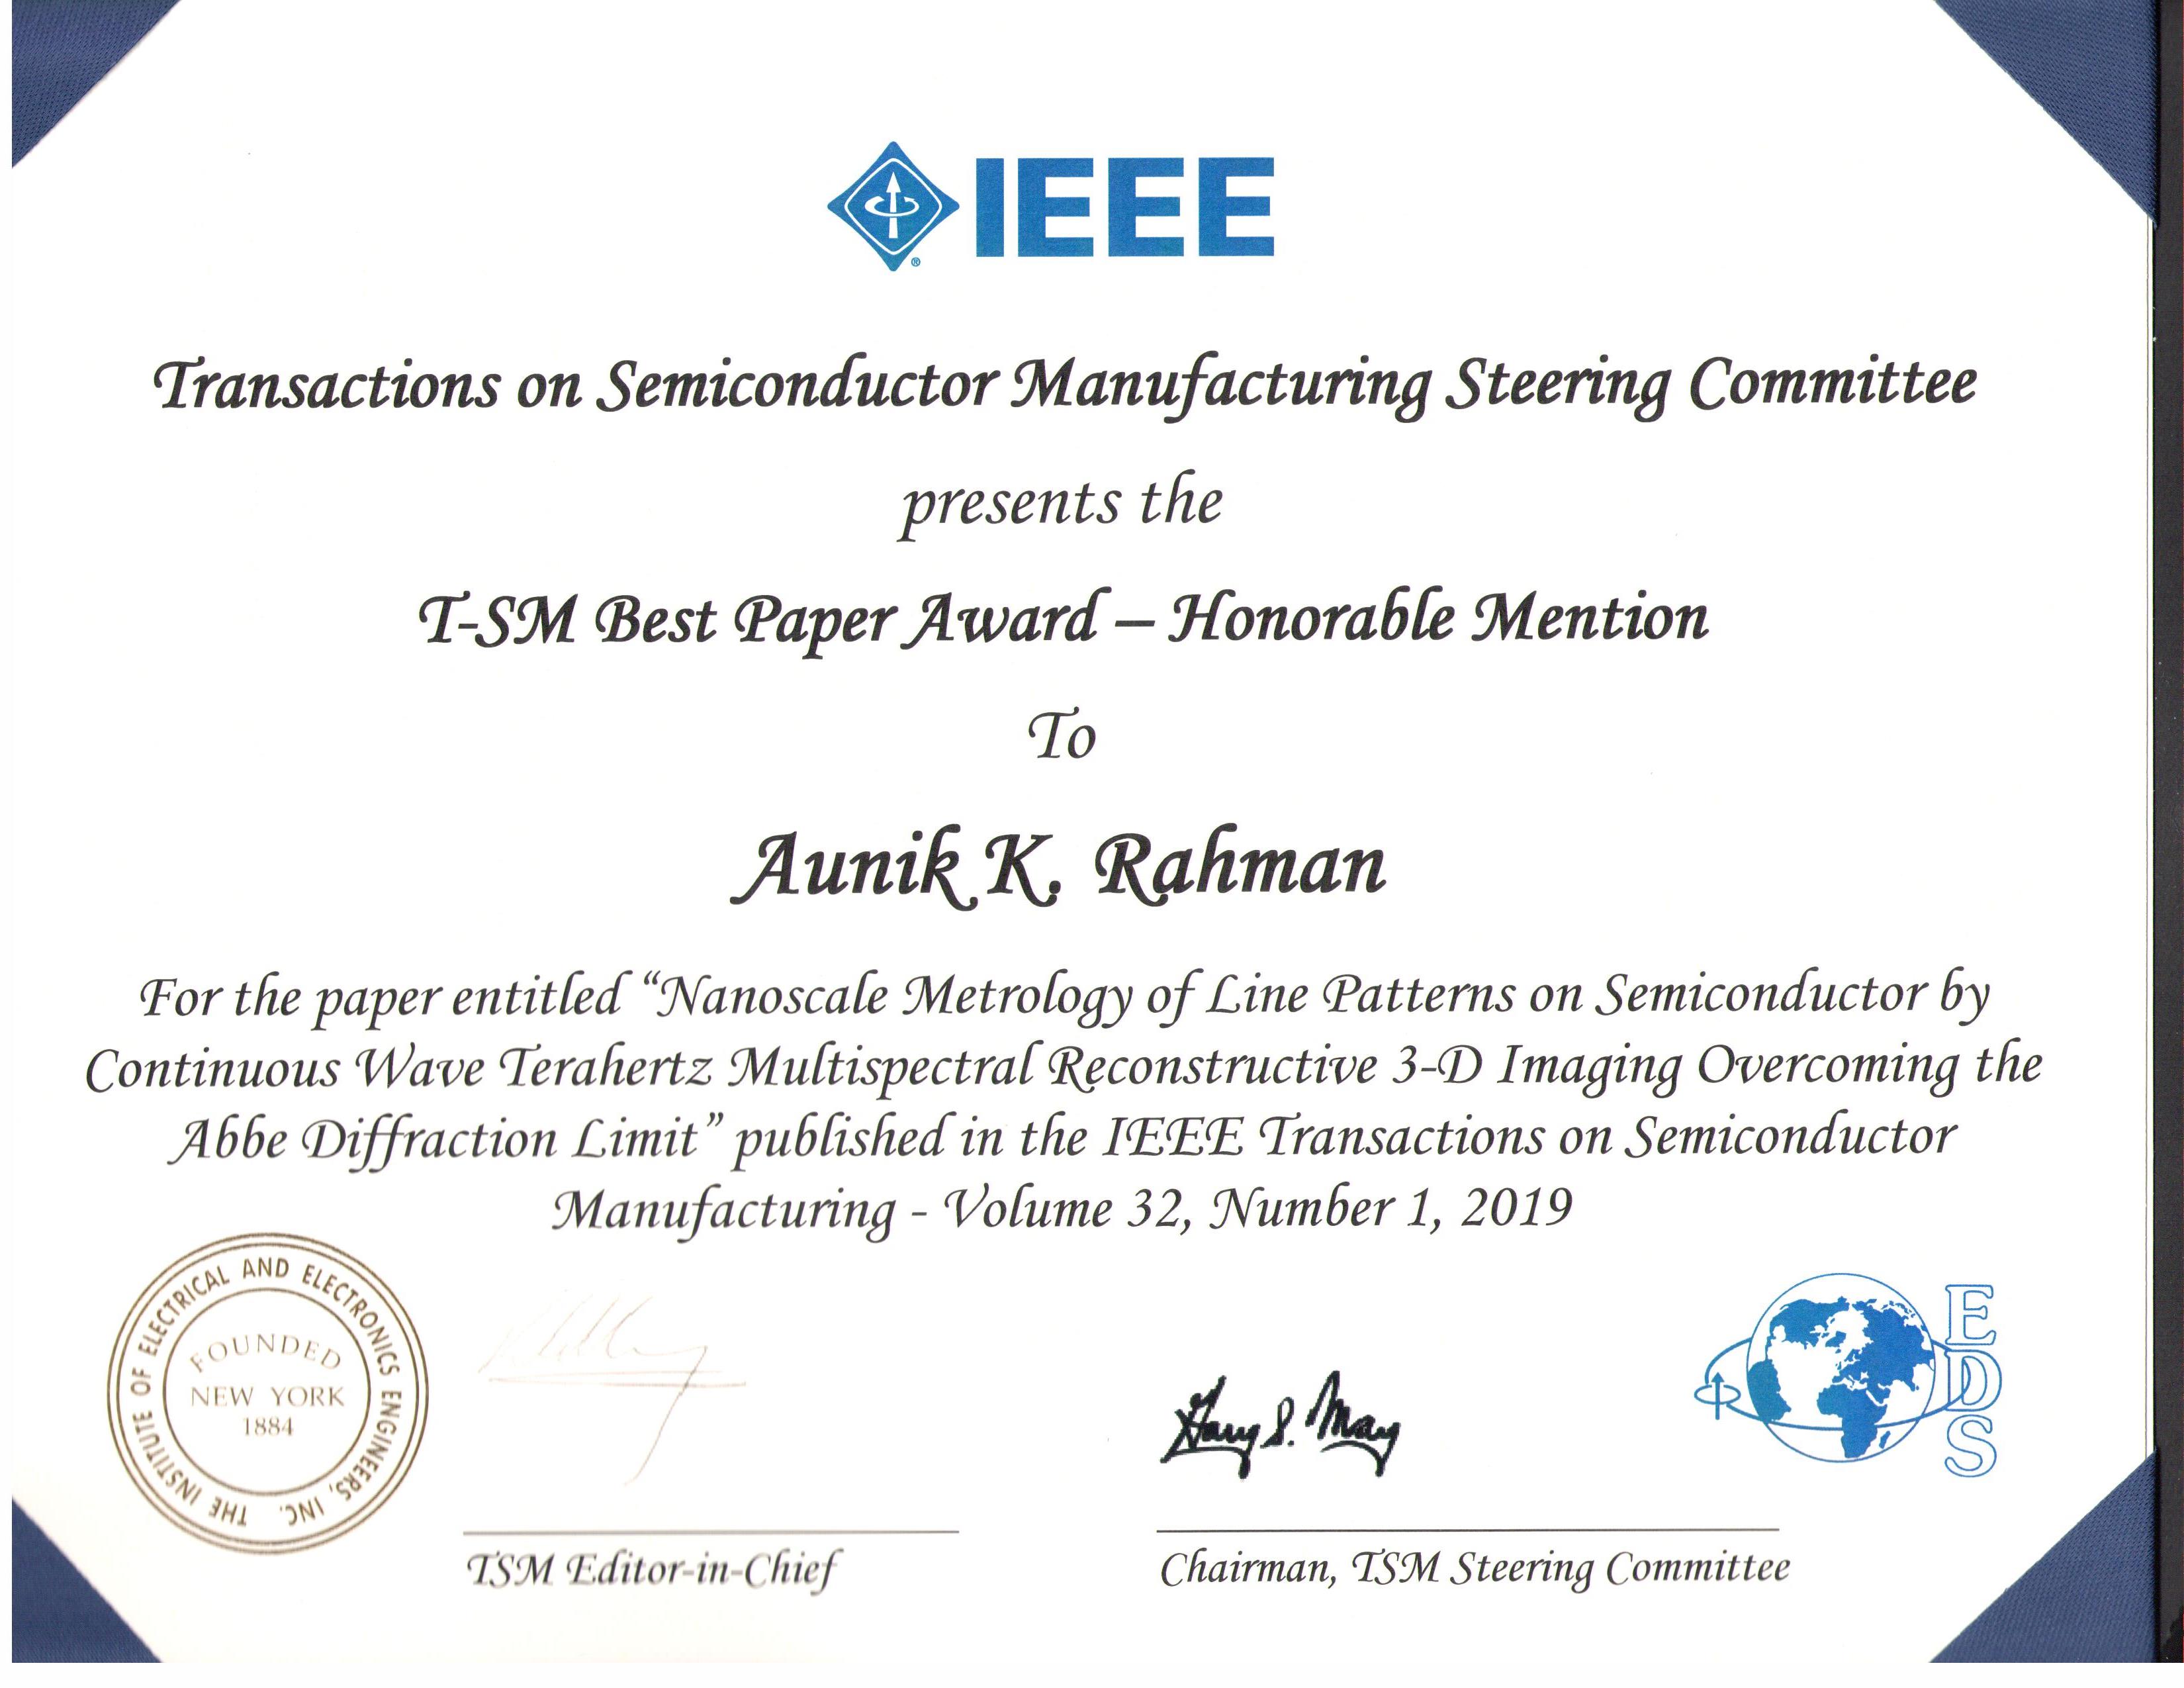 2018 Best paper honorable mention from IEEE - TSM